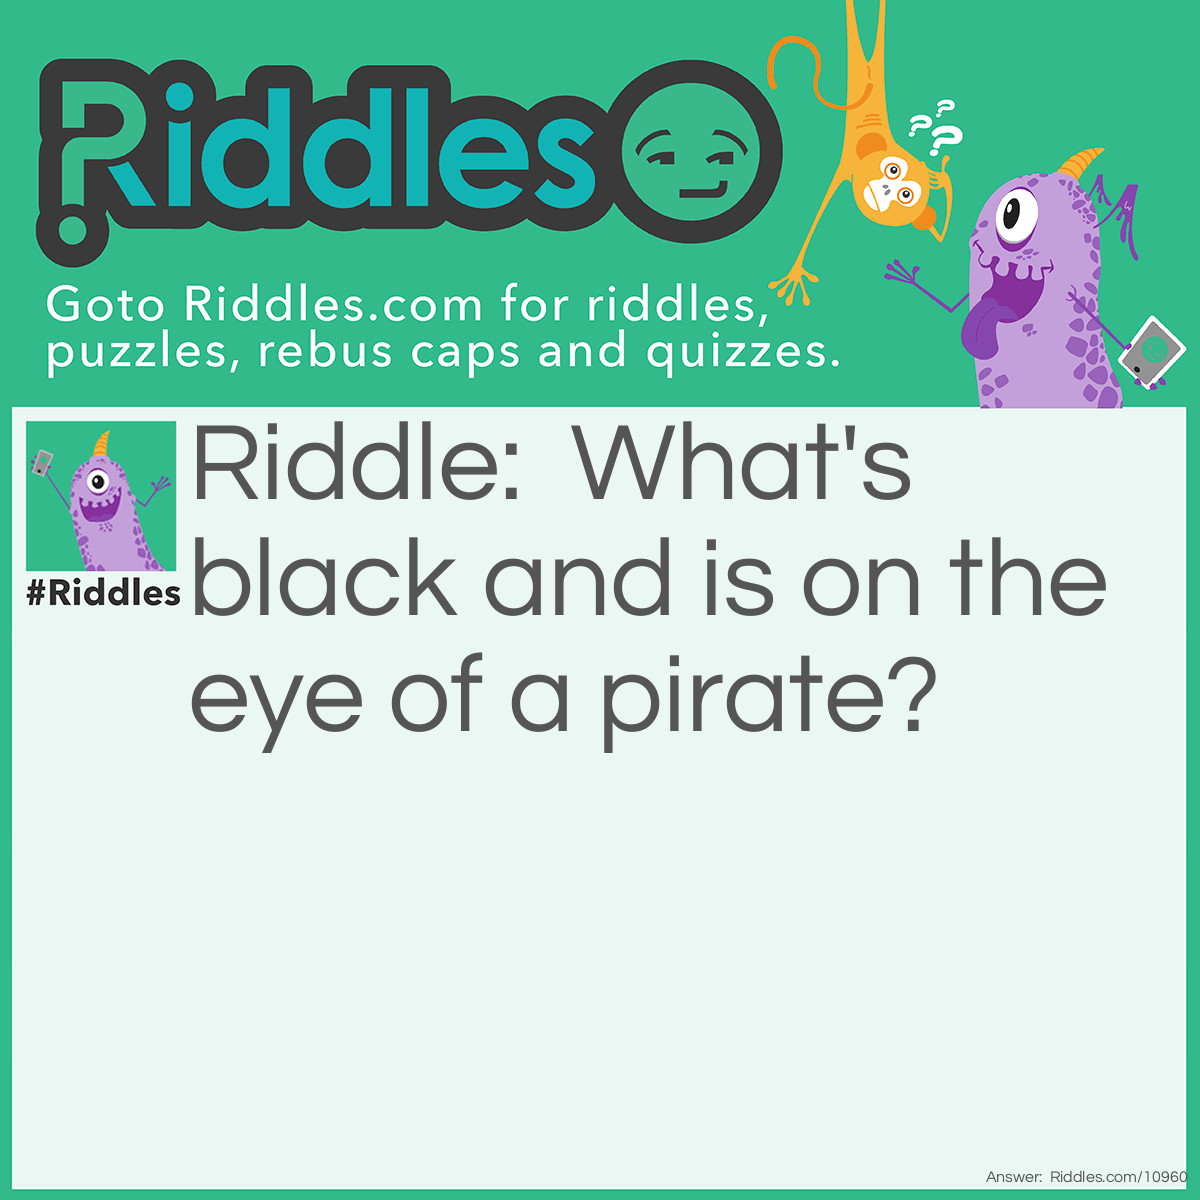 Riddle: What's black and is on the eye of a pirate? Answer: Eyepatch.